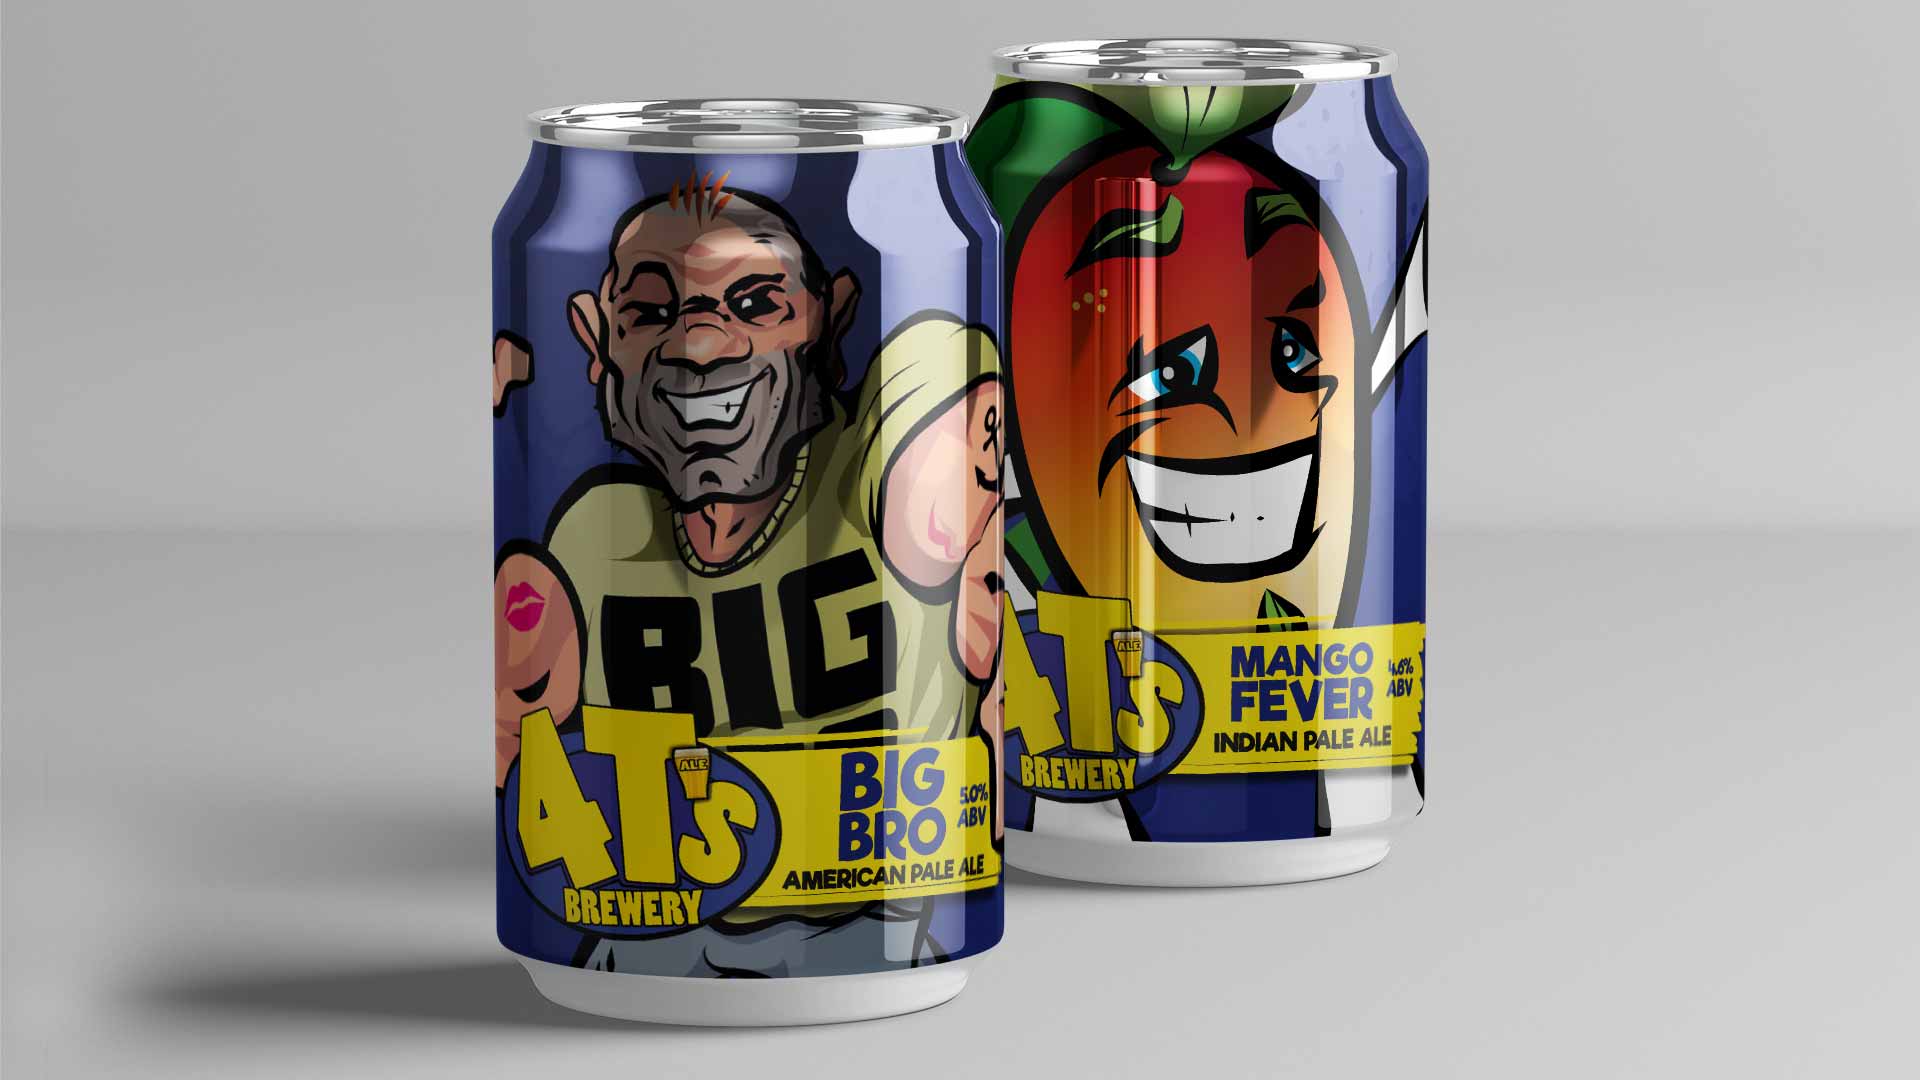 4T's Brewery Brewery Case Study Big Bro and Mango Cans